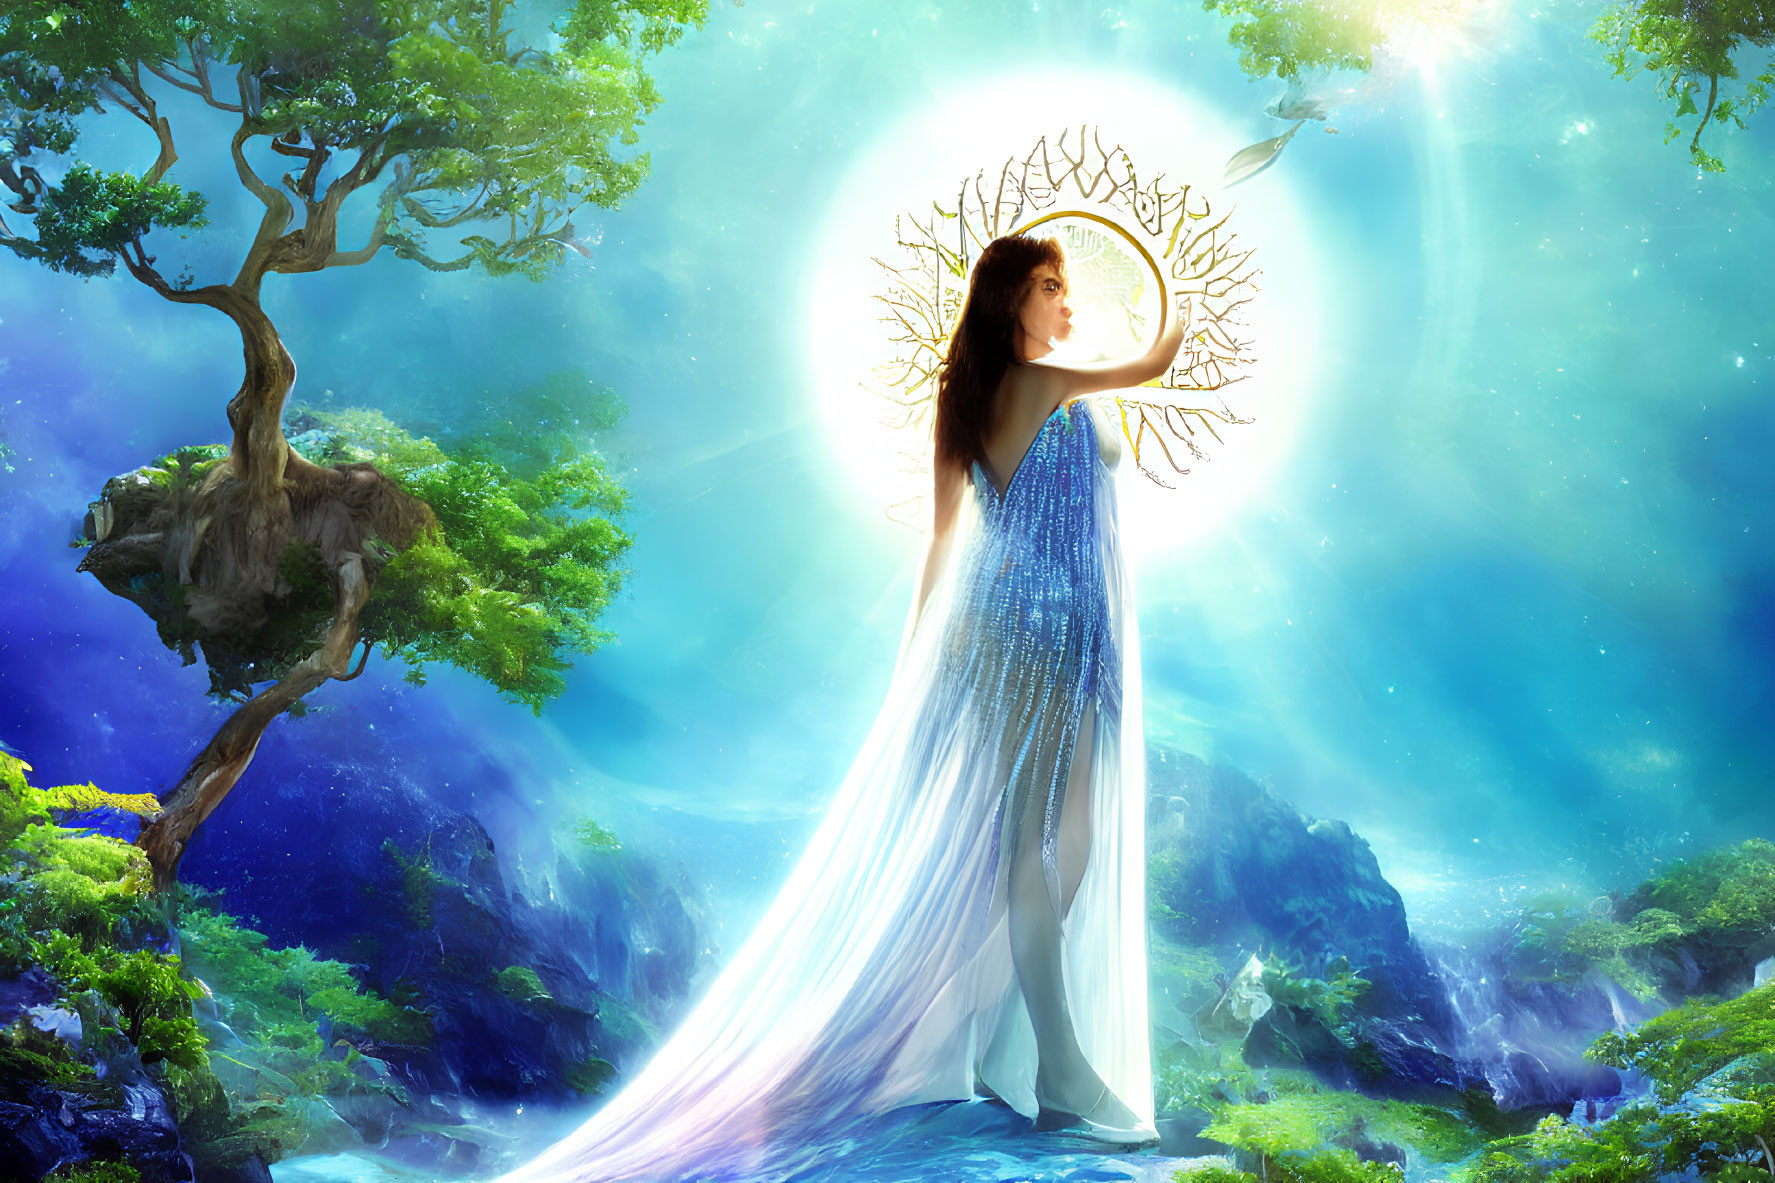 Mystical woman in blue gown with dove near glowing tree in vibrant forest